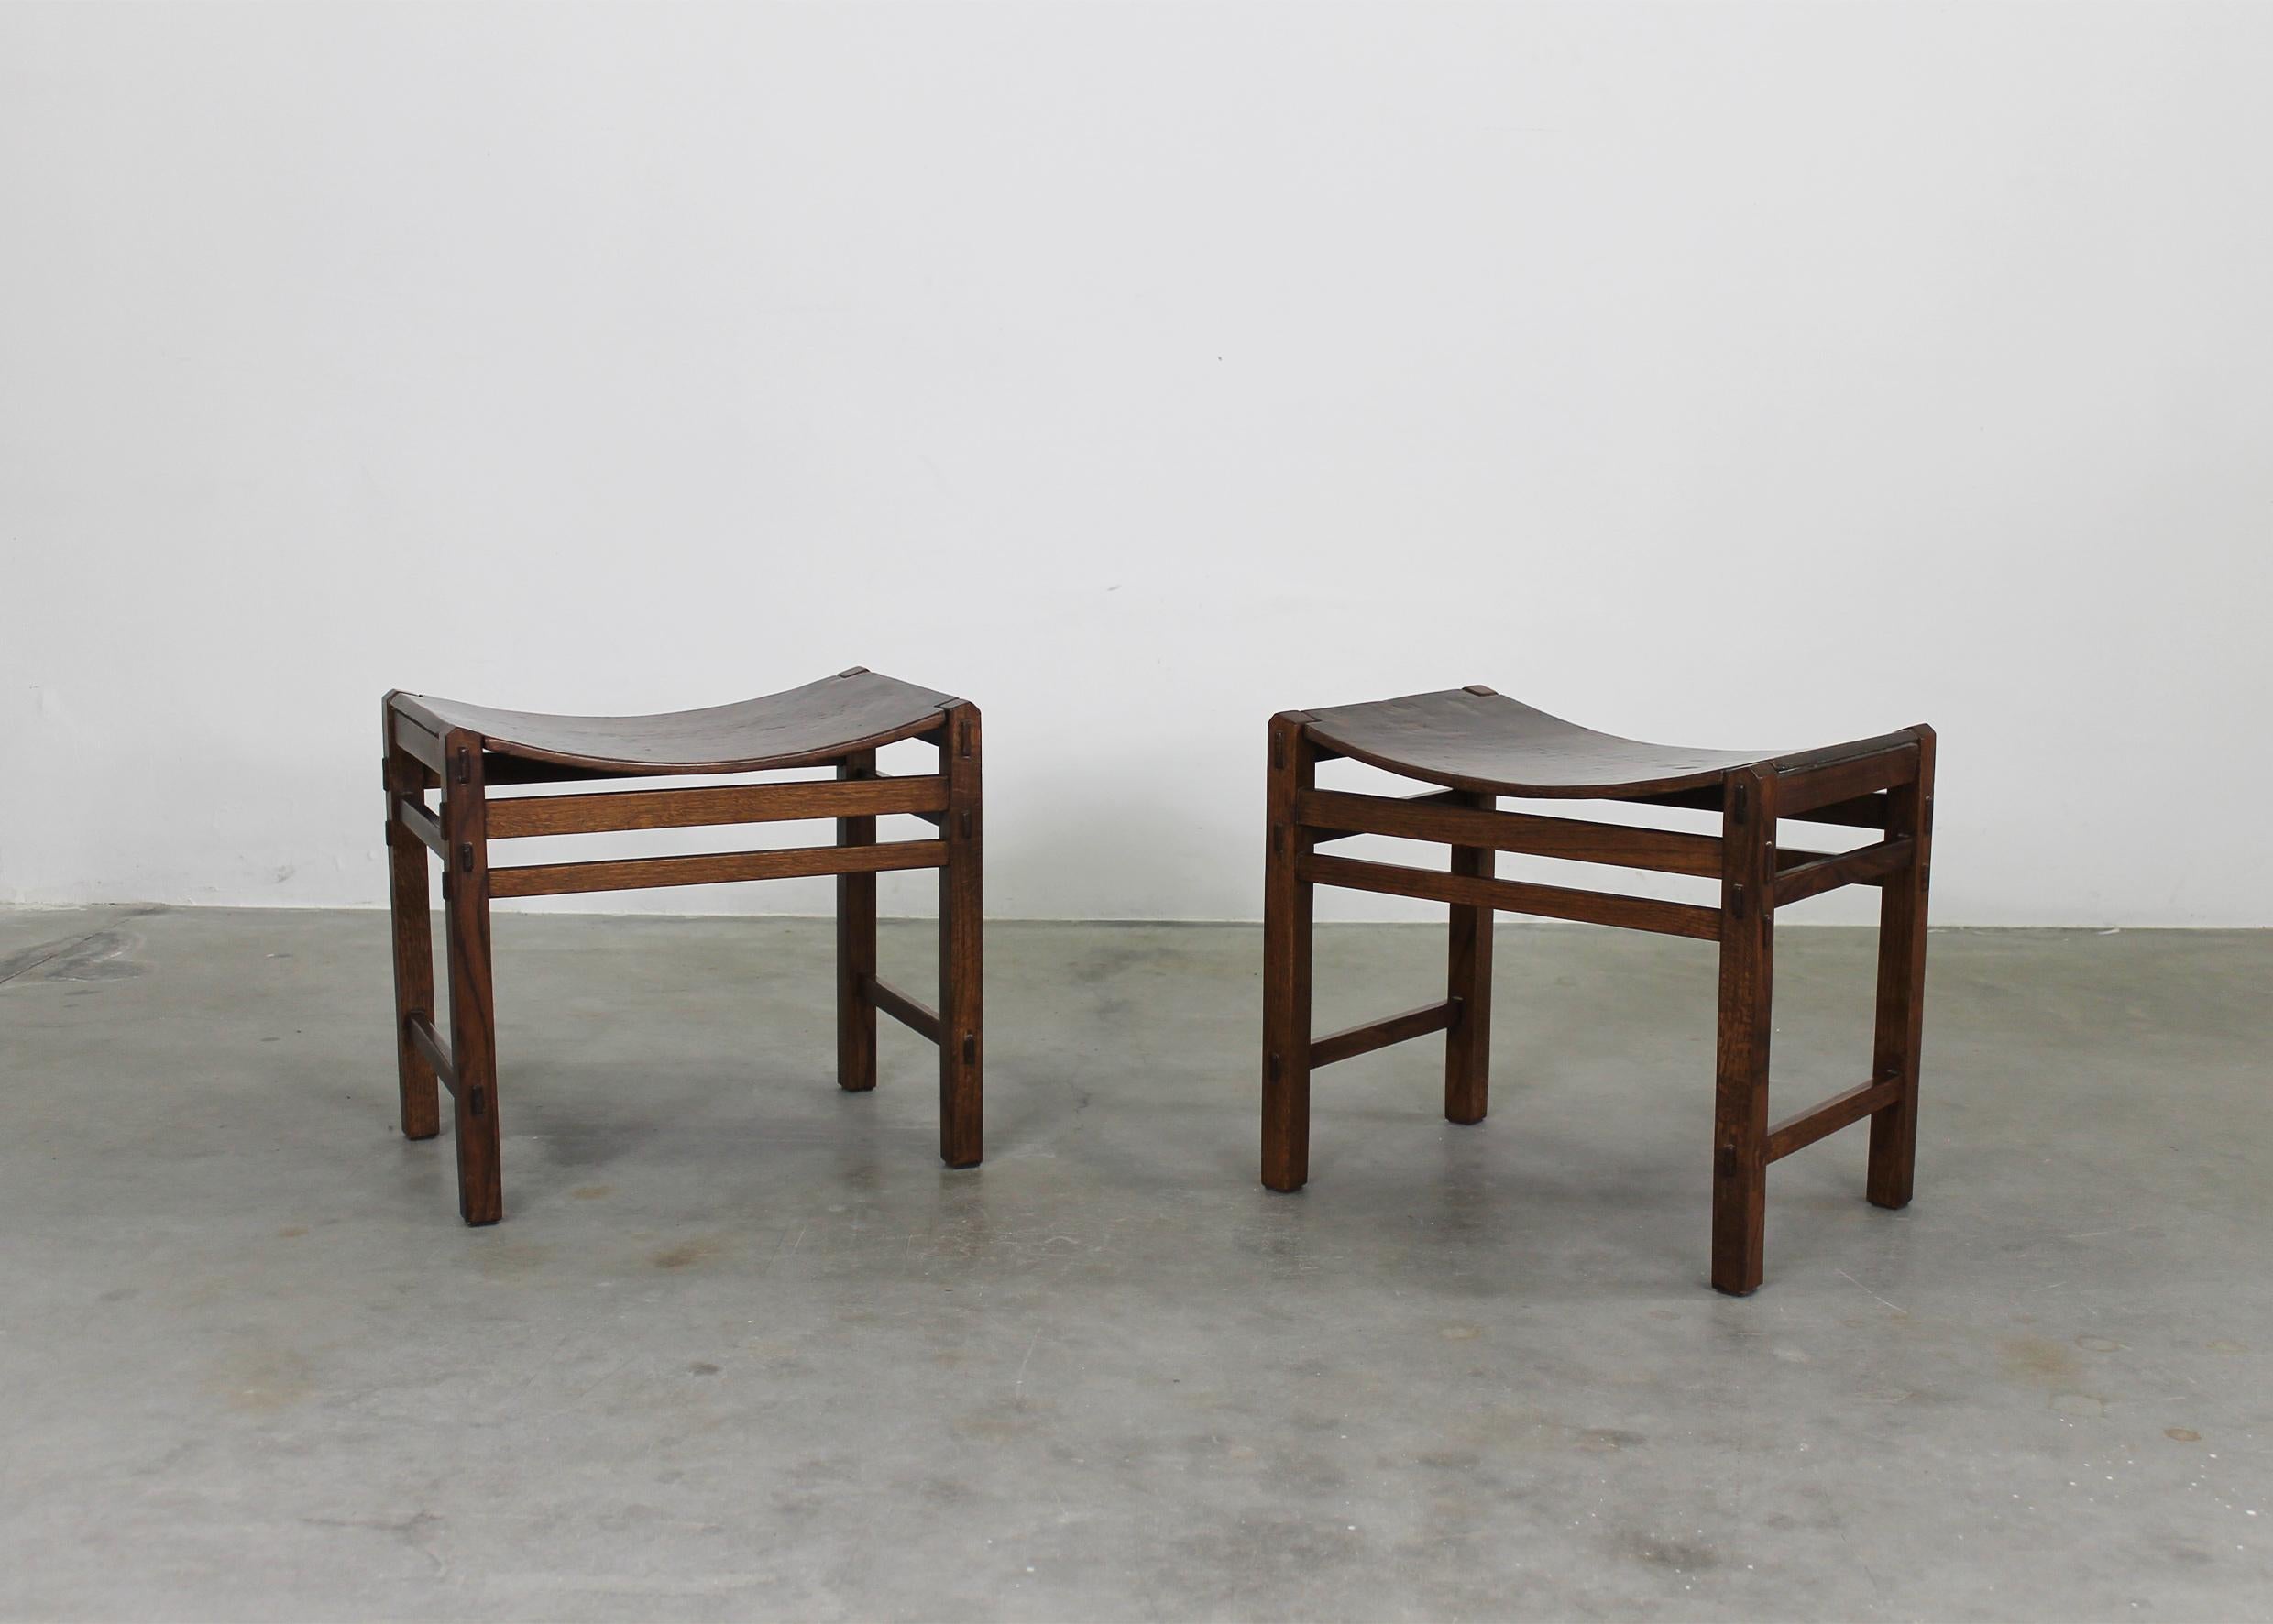 Giuseppe Rivadossi Set of Two Stools in Oak Wood by Officina Rivadossi 1970s In Good Condition For Sale In Montecatini Terme, IT